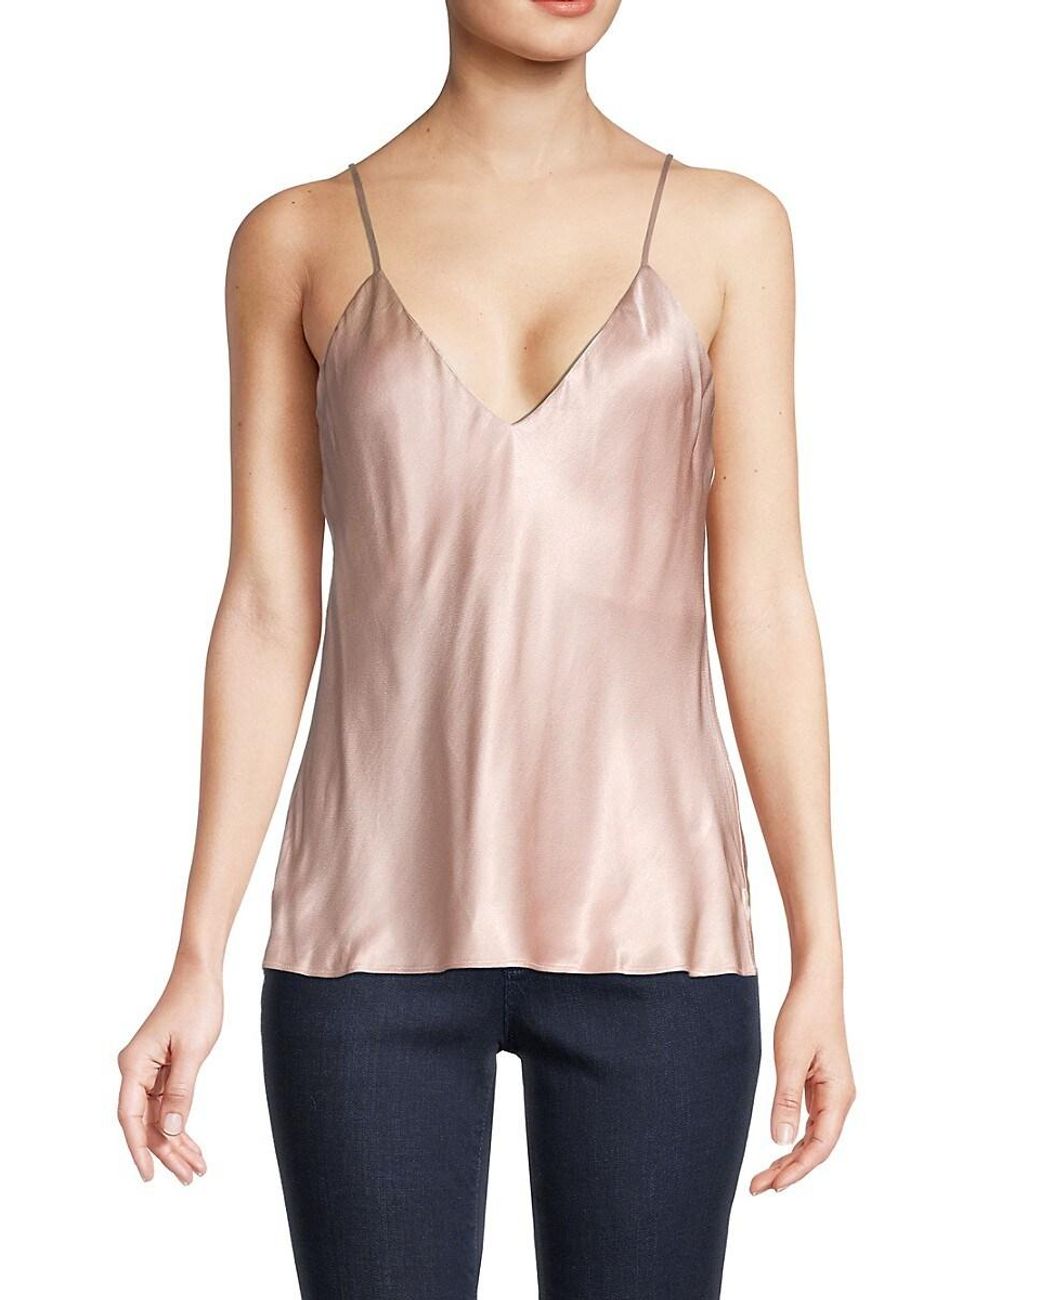 Socialite Solid Satin Camisole Top in Pink